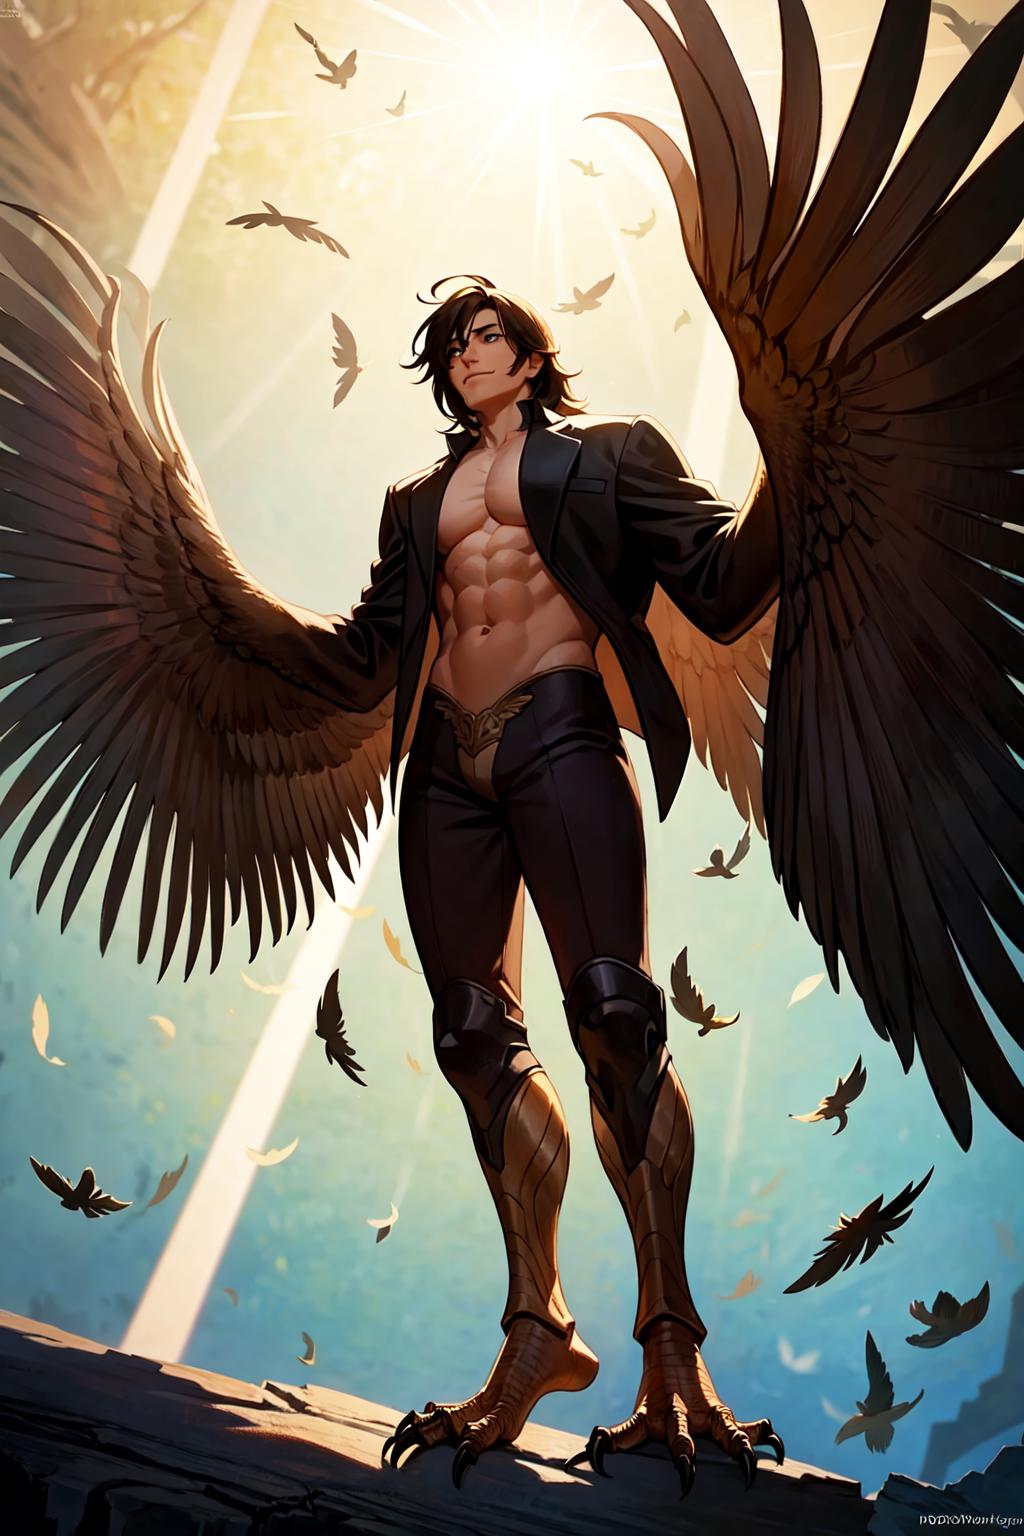 Man wearing black and gold with wings and standing in sunlight.